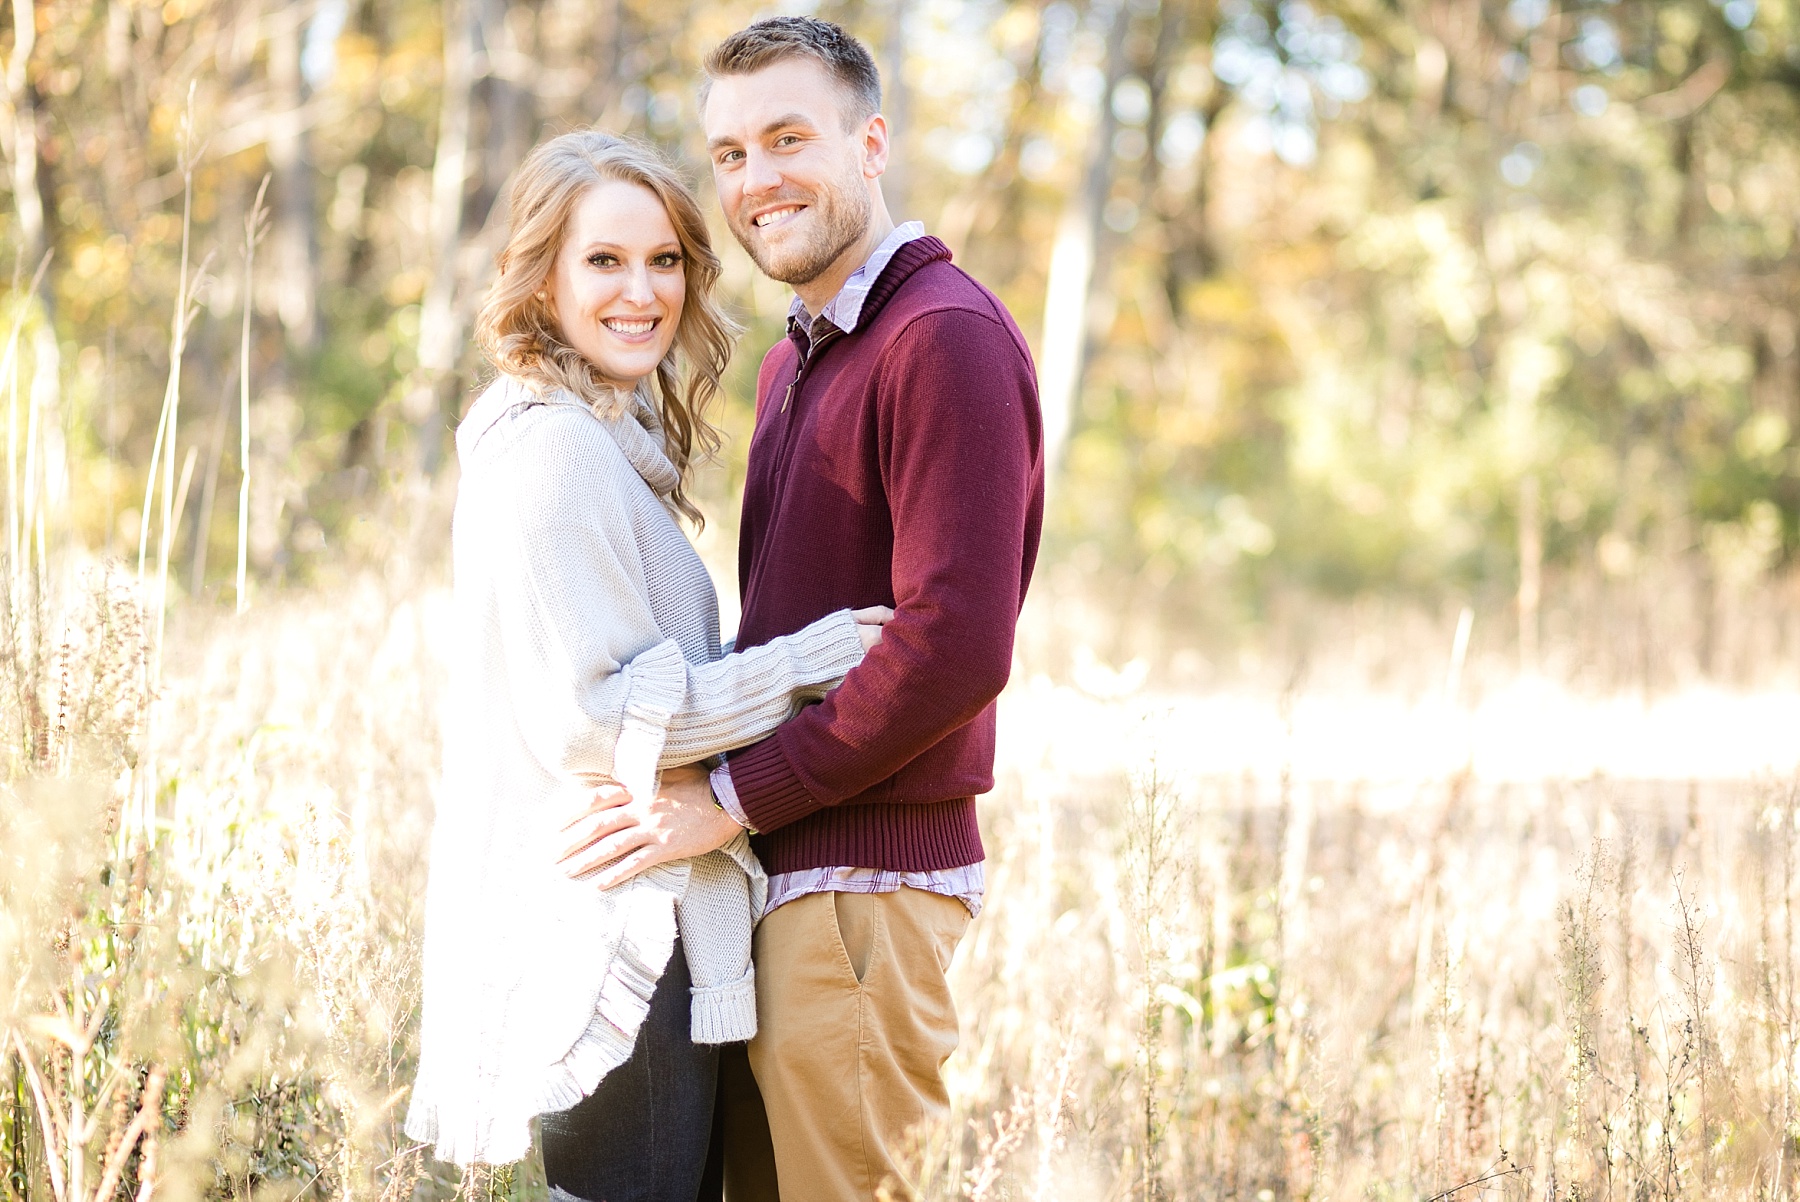 Kirstie & Erik explored the place they got engaged for their Chippewa Falls engagement photos.